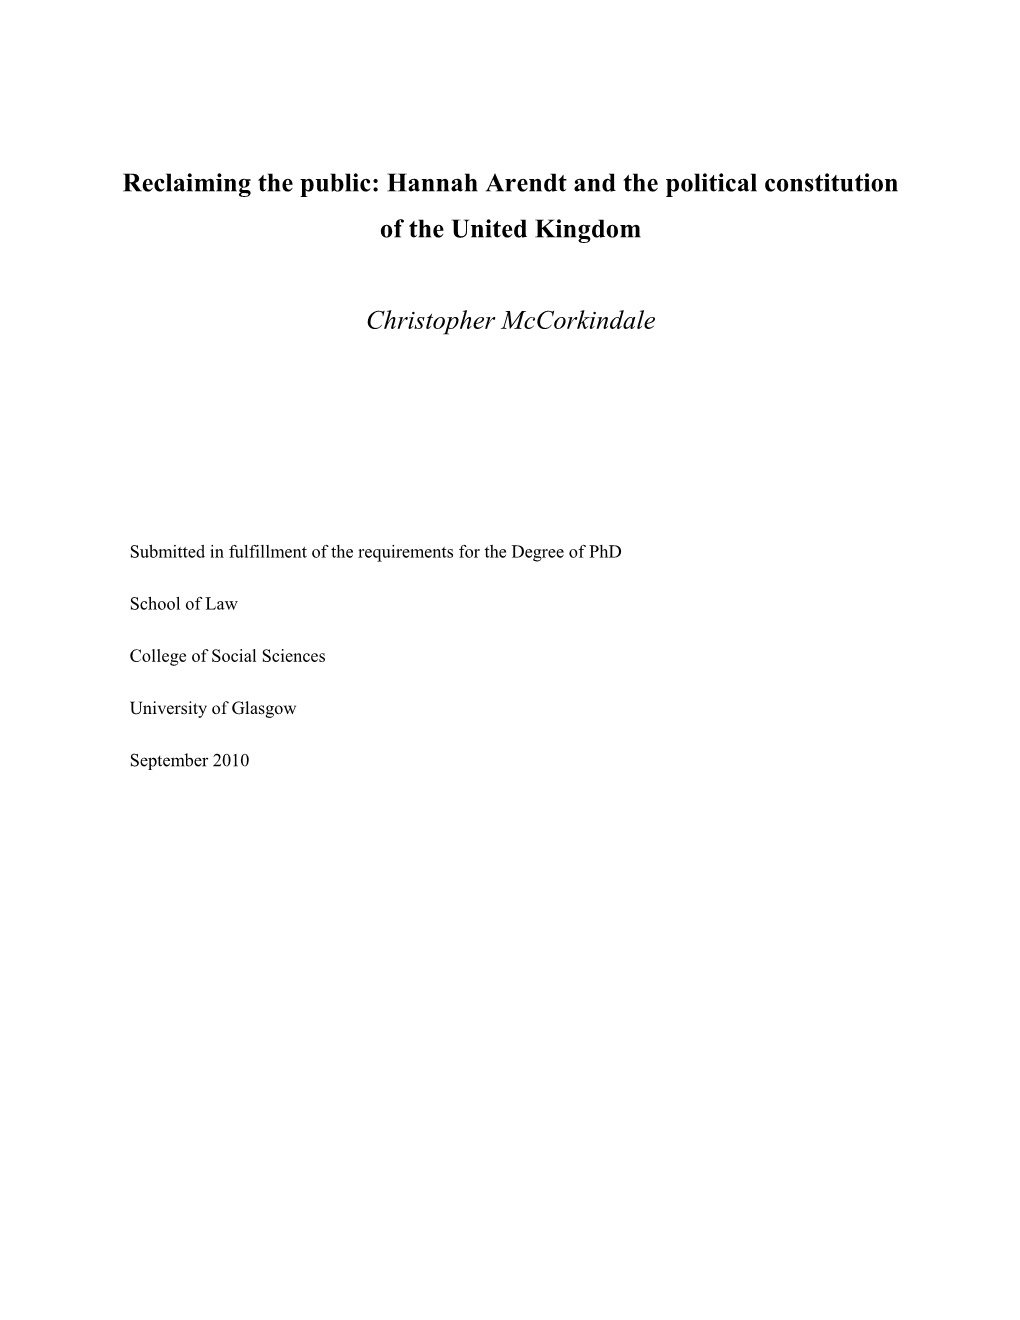 Mccorkindale-2011-Reclaiming-The-Public-Hanna-Arendt-And-The-Political-Constitution